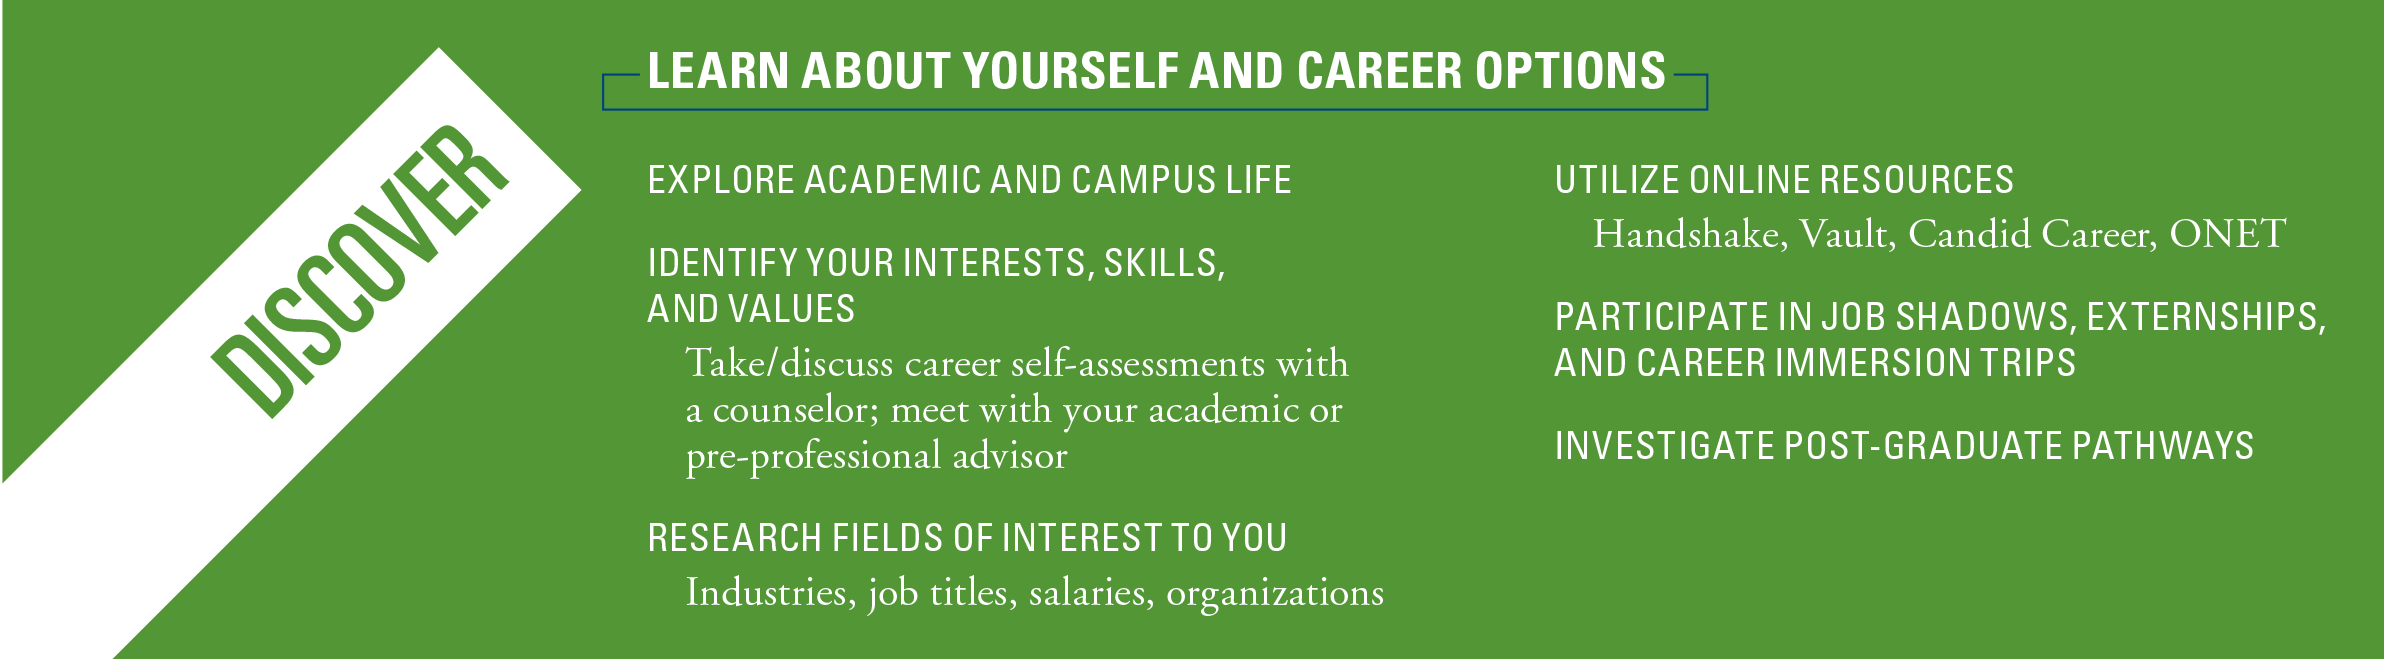 Discover: Learn about yourself and career options